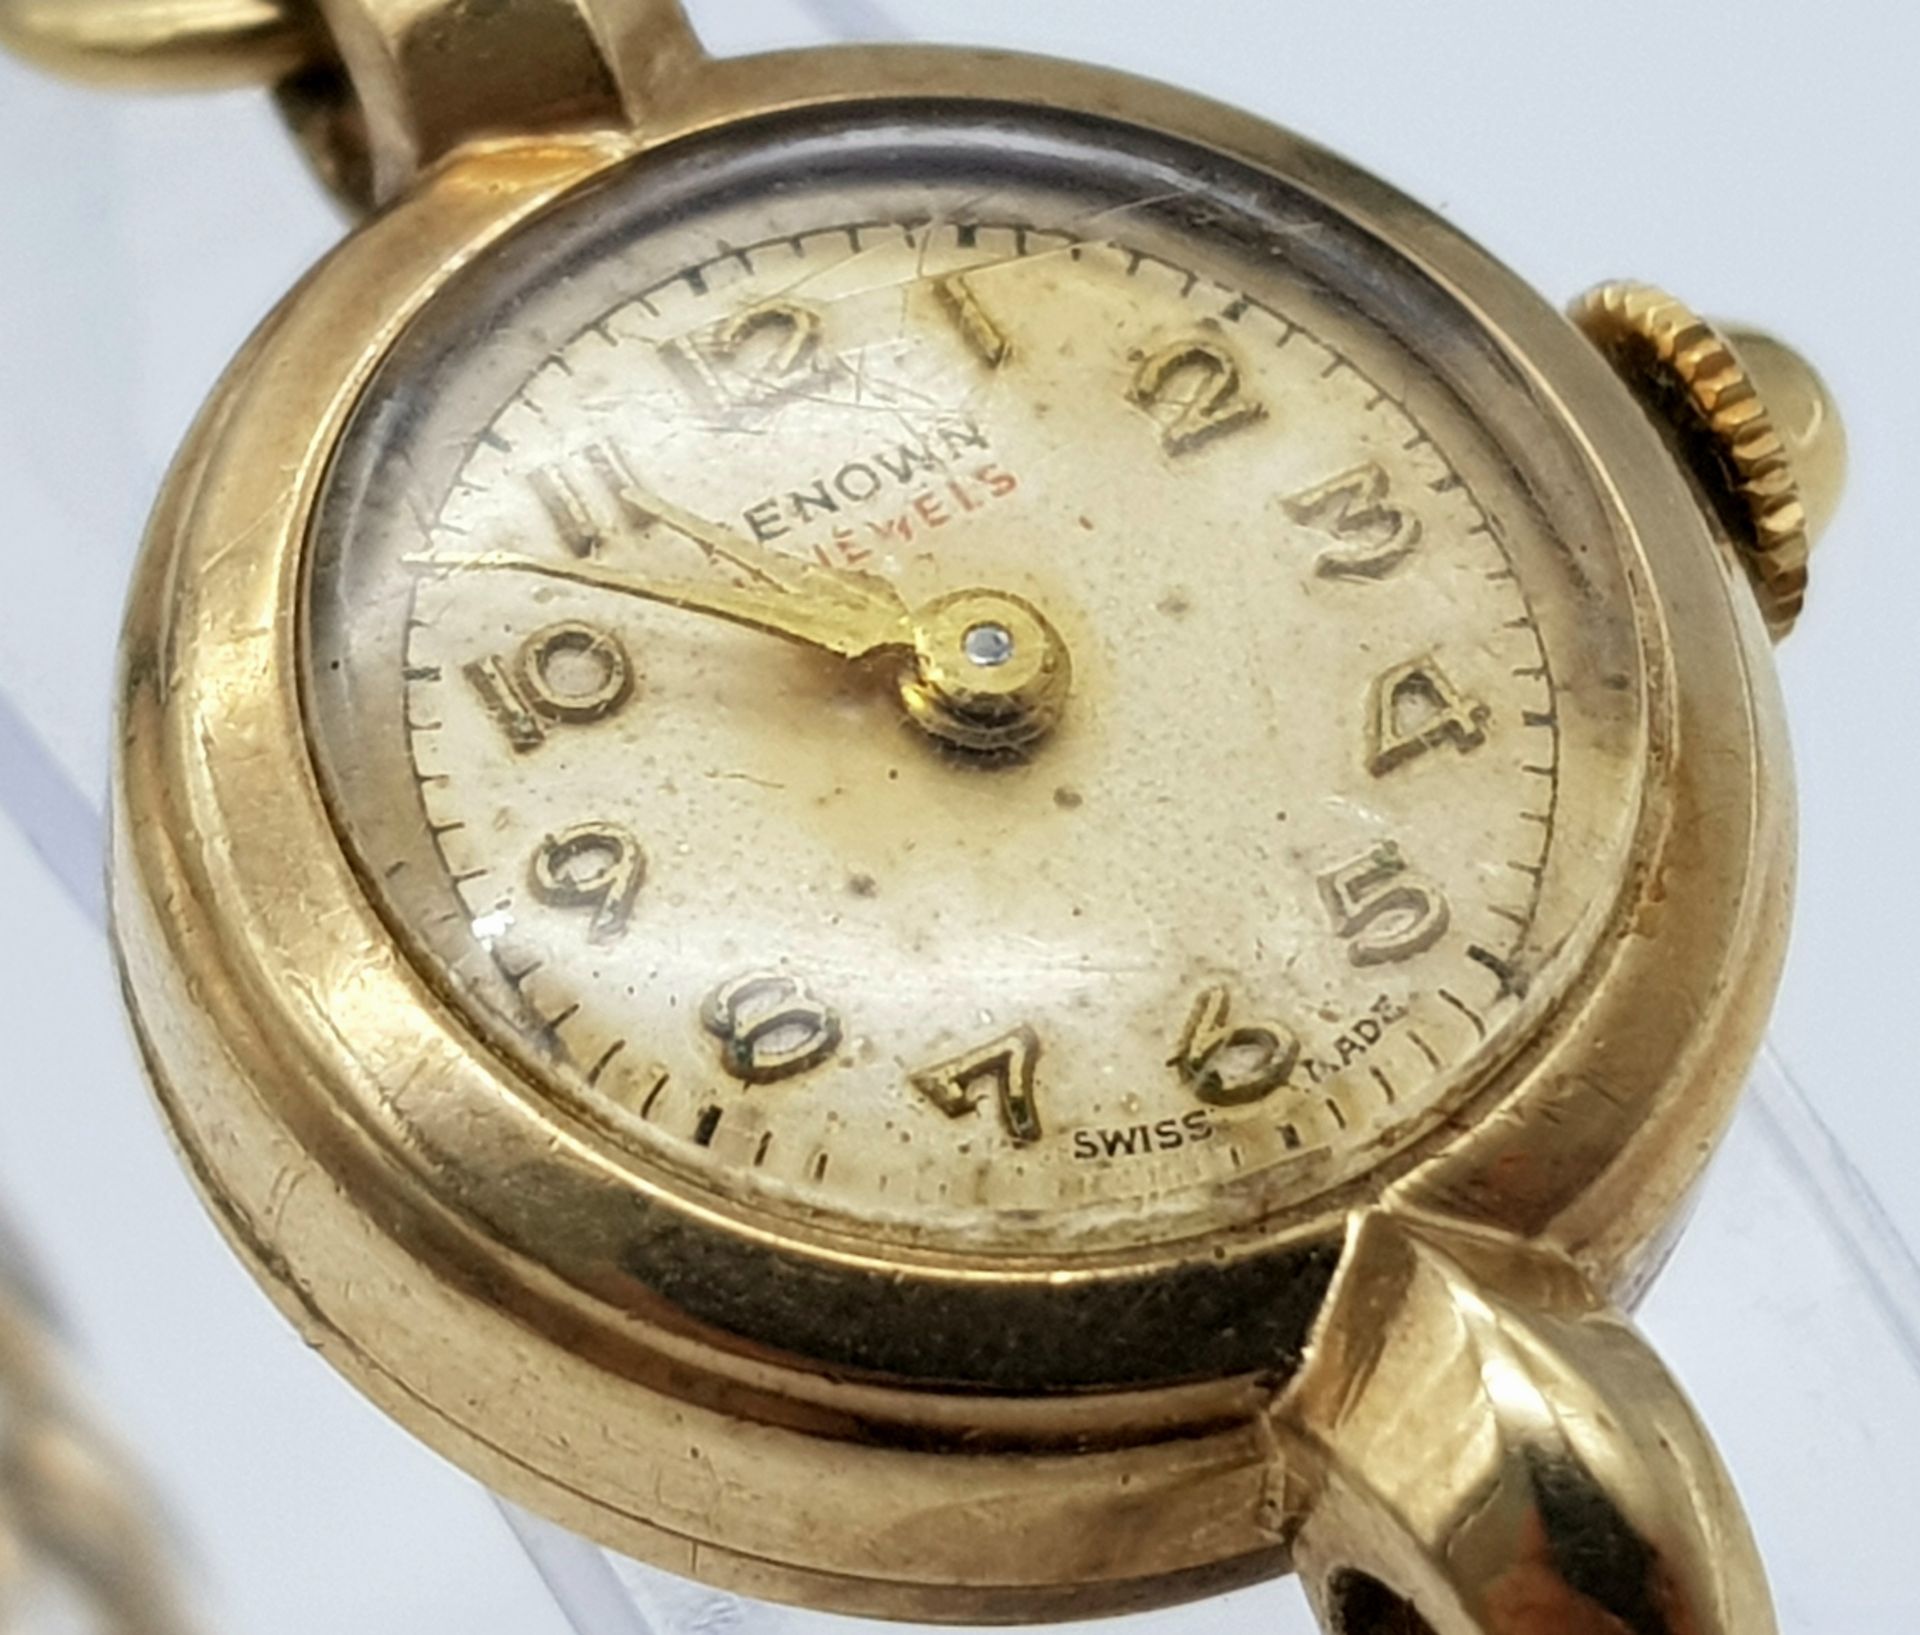 A Vintage 9K Yellow Gold Renown Ladies Watch. 9K gold bracelet and case - 18mm. Patinaed dial. - Image 2 of 6